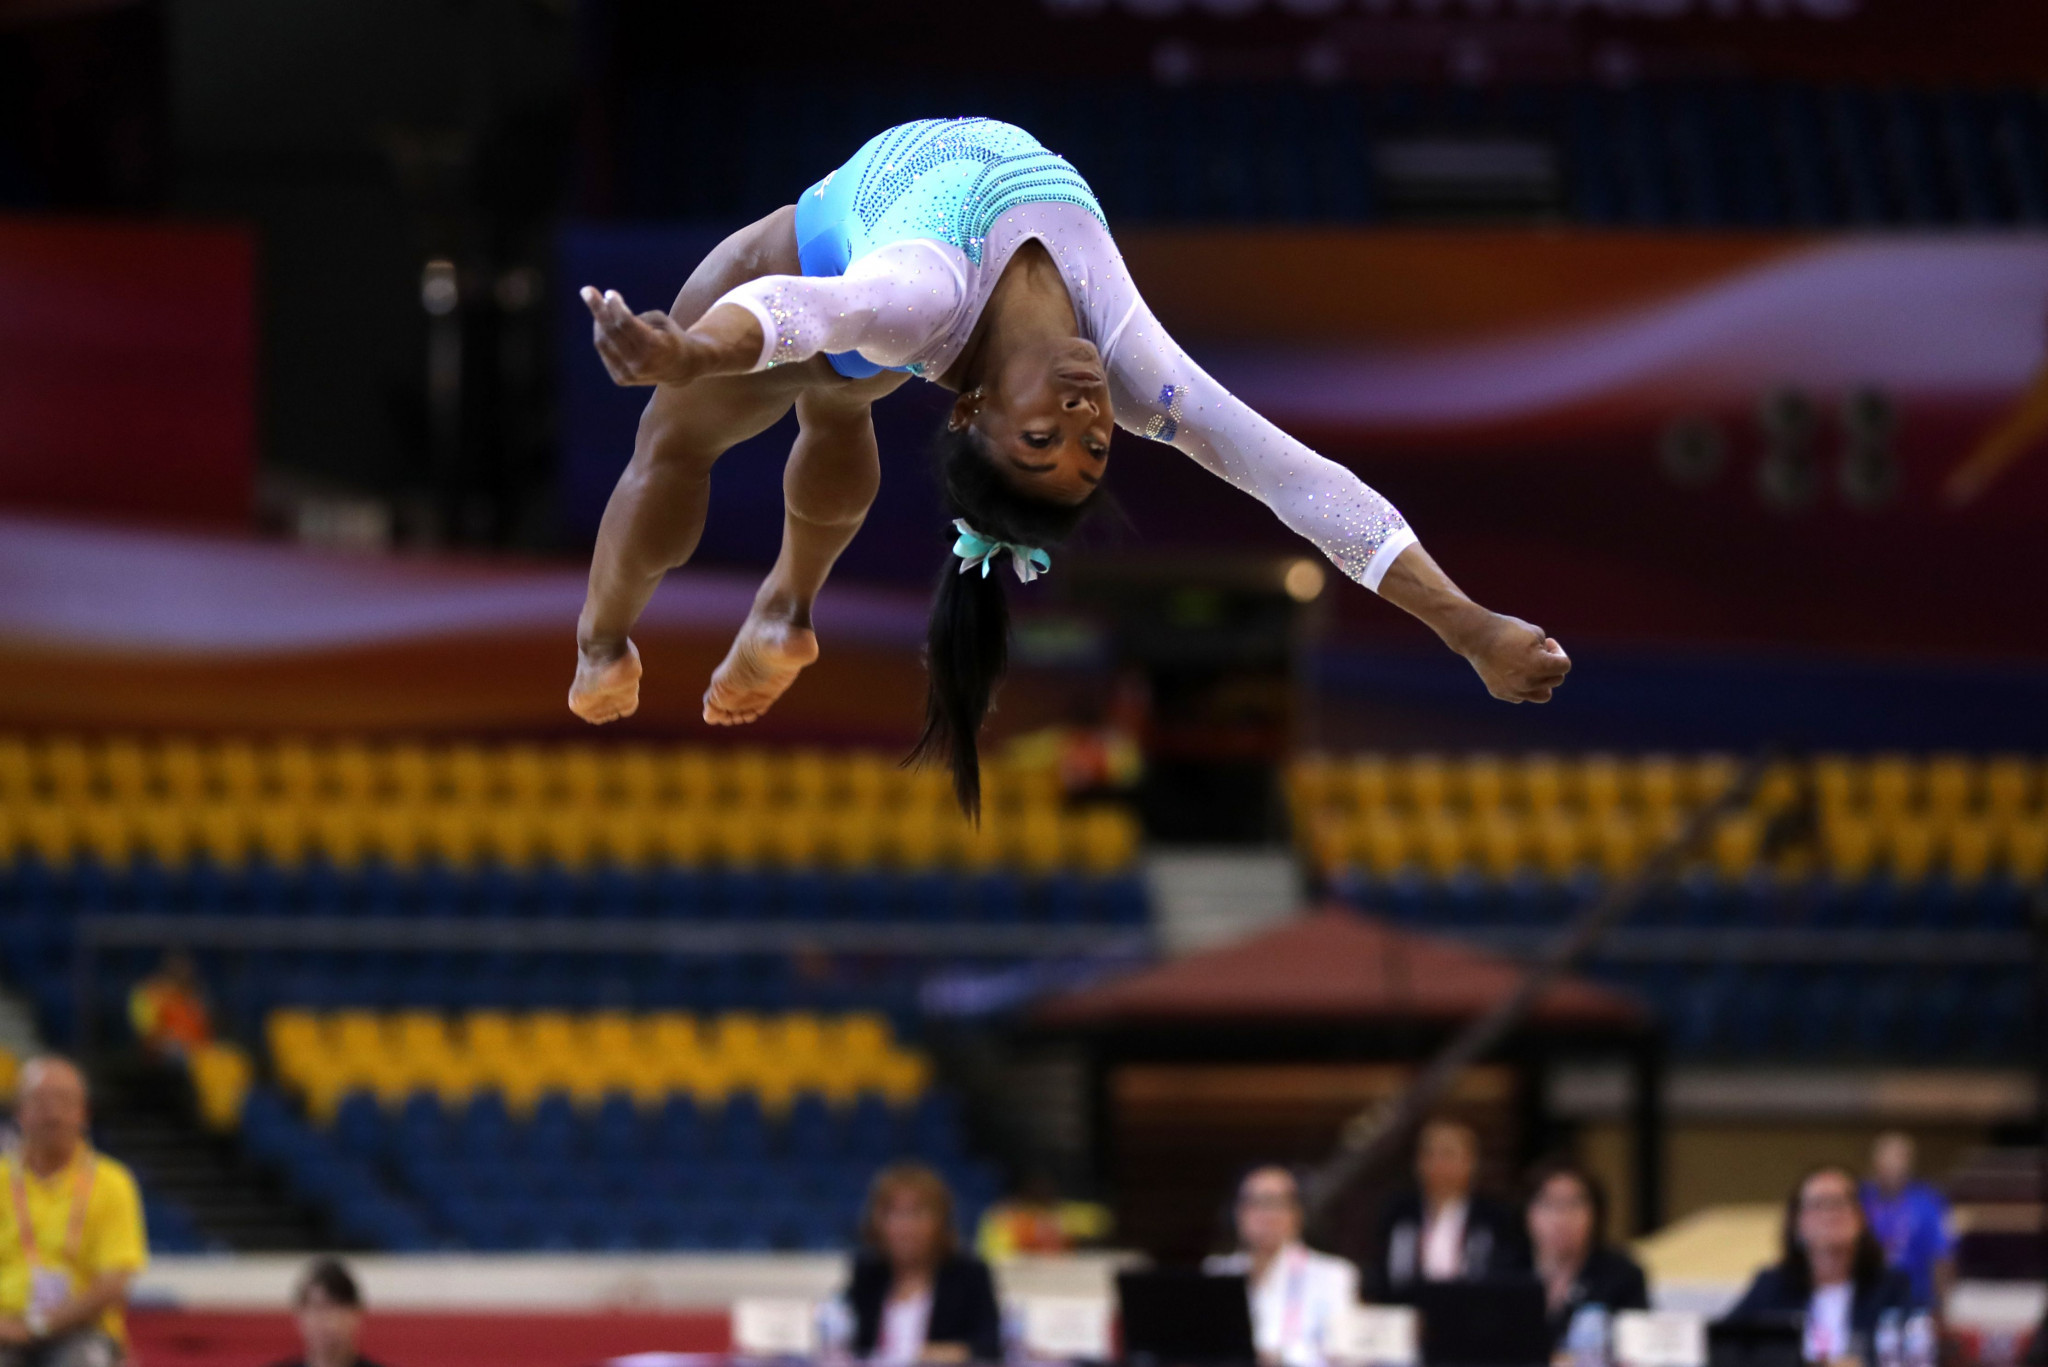 FIG and Fujitsu have announced that they have developed a new judging support system, which will be tested before being implemented at the 2019 World Artistic Gymnastics Championships ©FIG